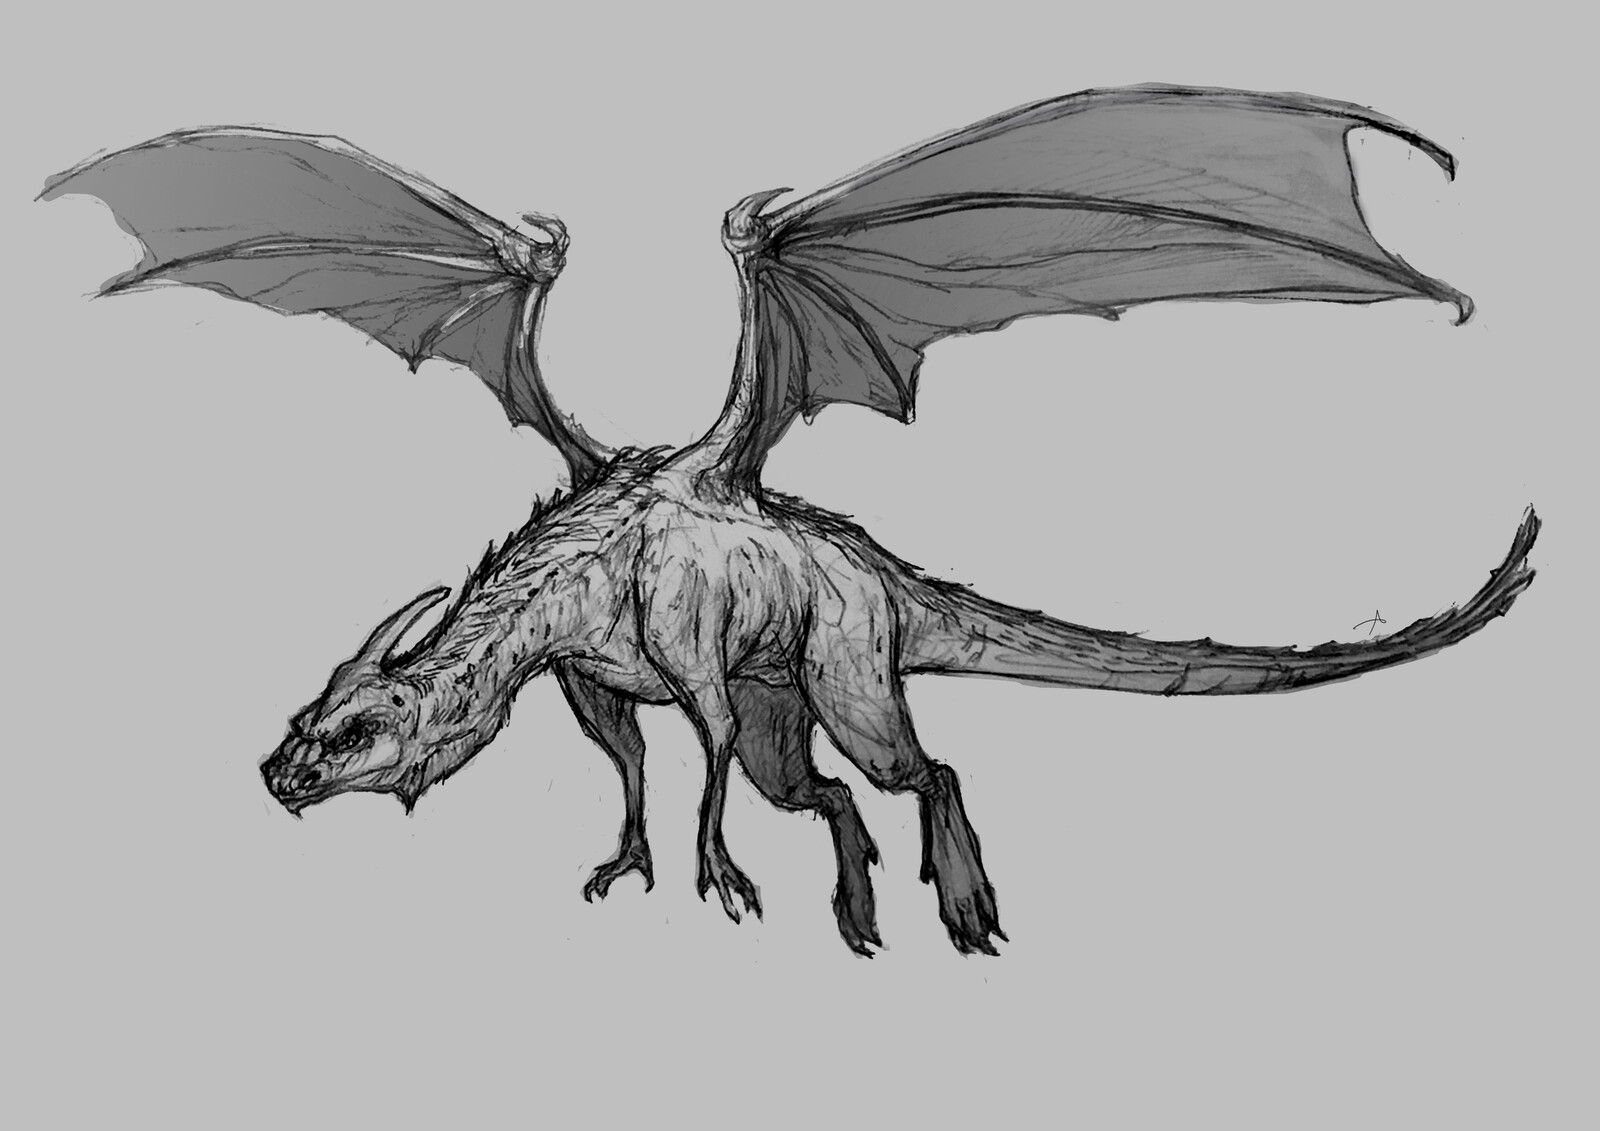 SMAUGUST - FLYING DRAGON CONCEPT